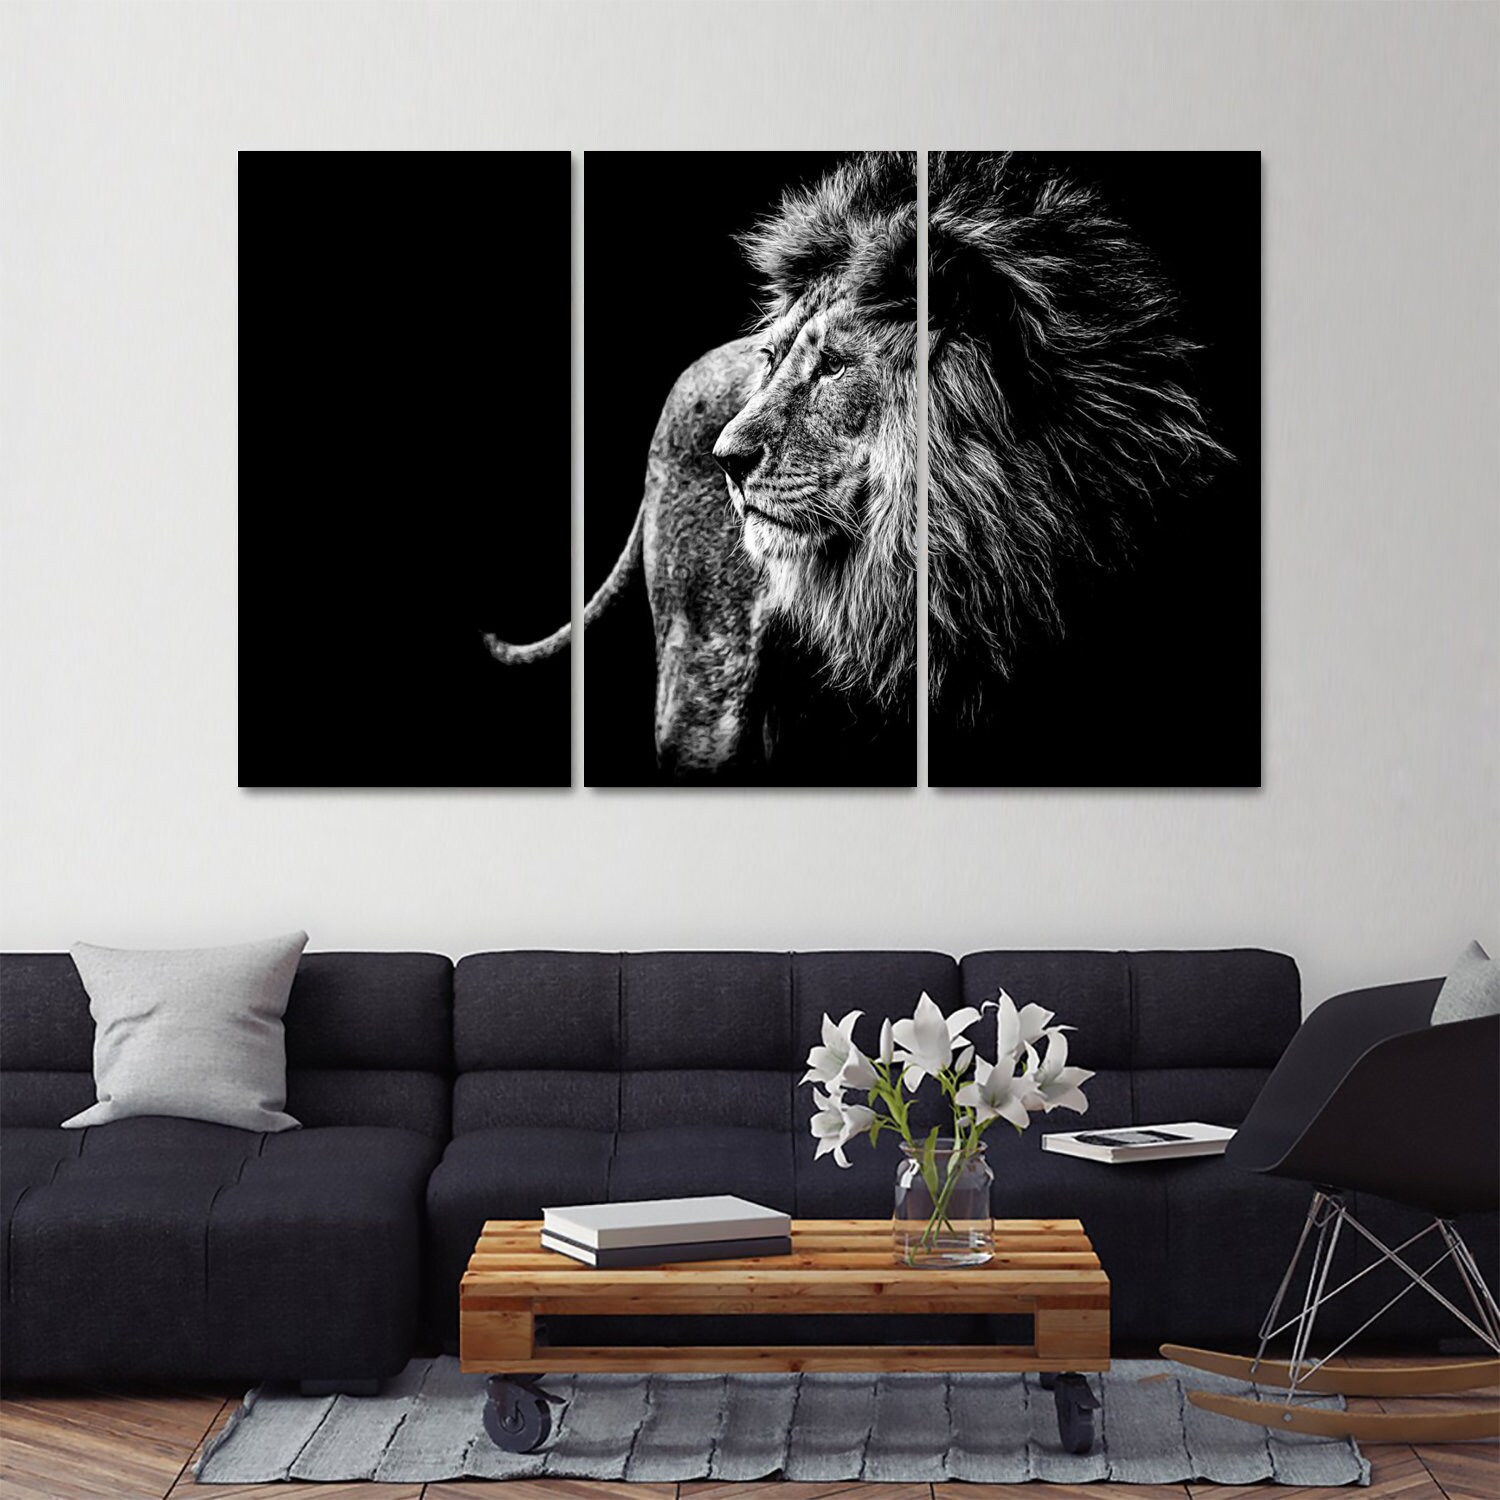 Black And White Lion Canvas Black And White Lion Wall Art. | Etsy